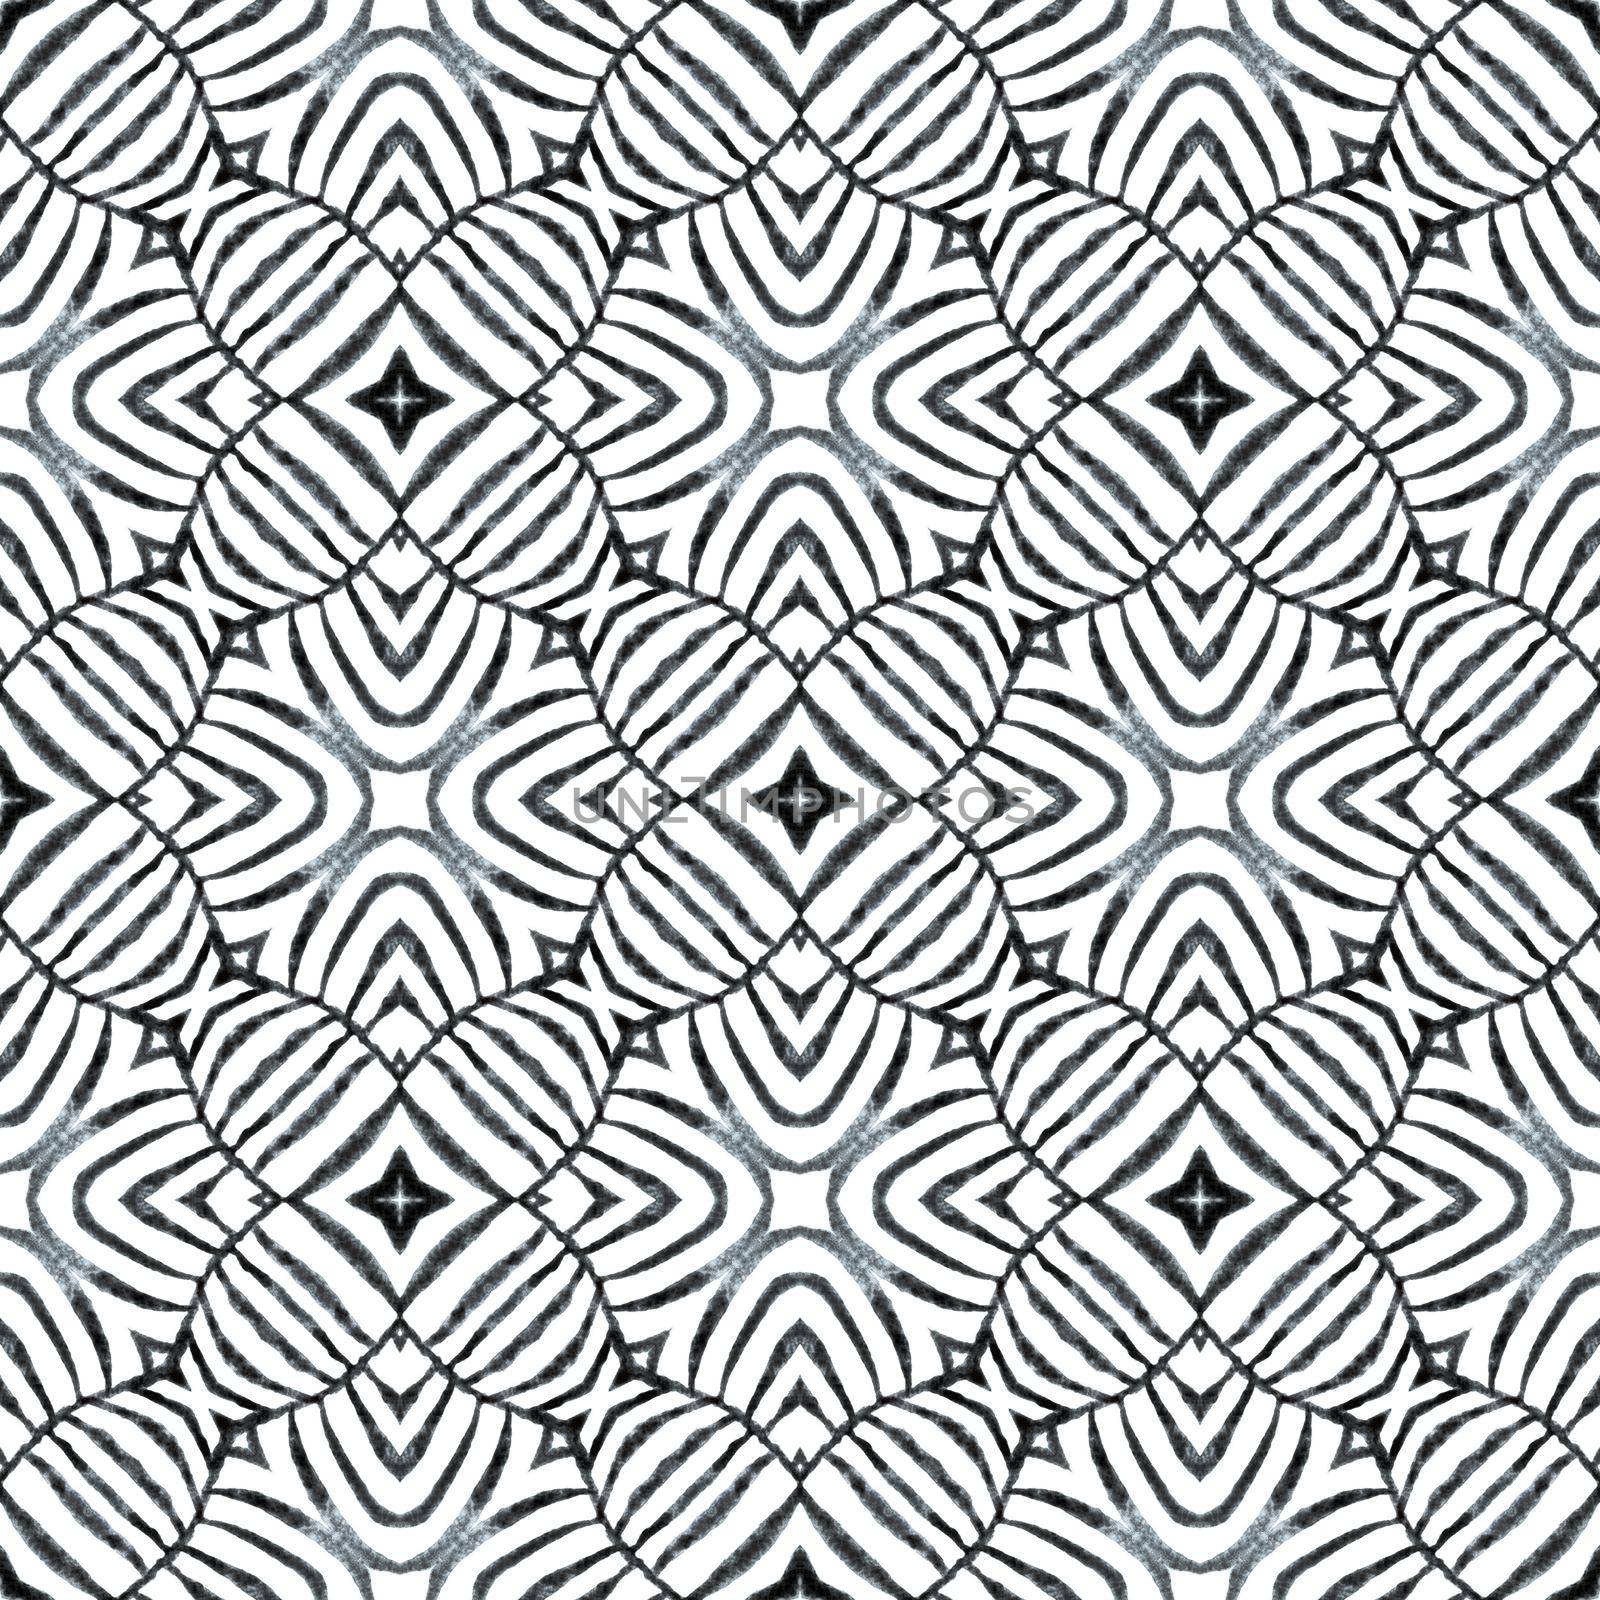 Textile ready fresh print, swimwear fabric, wallpaper, wrapping. Black and white immaculate boho chic summer design. Medallion seamless pattern. Watercolor medallion seamless border.